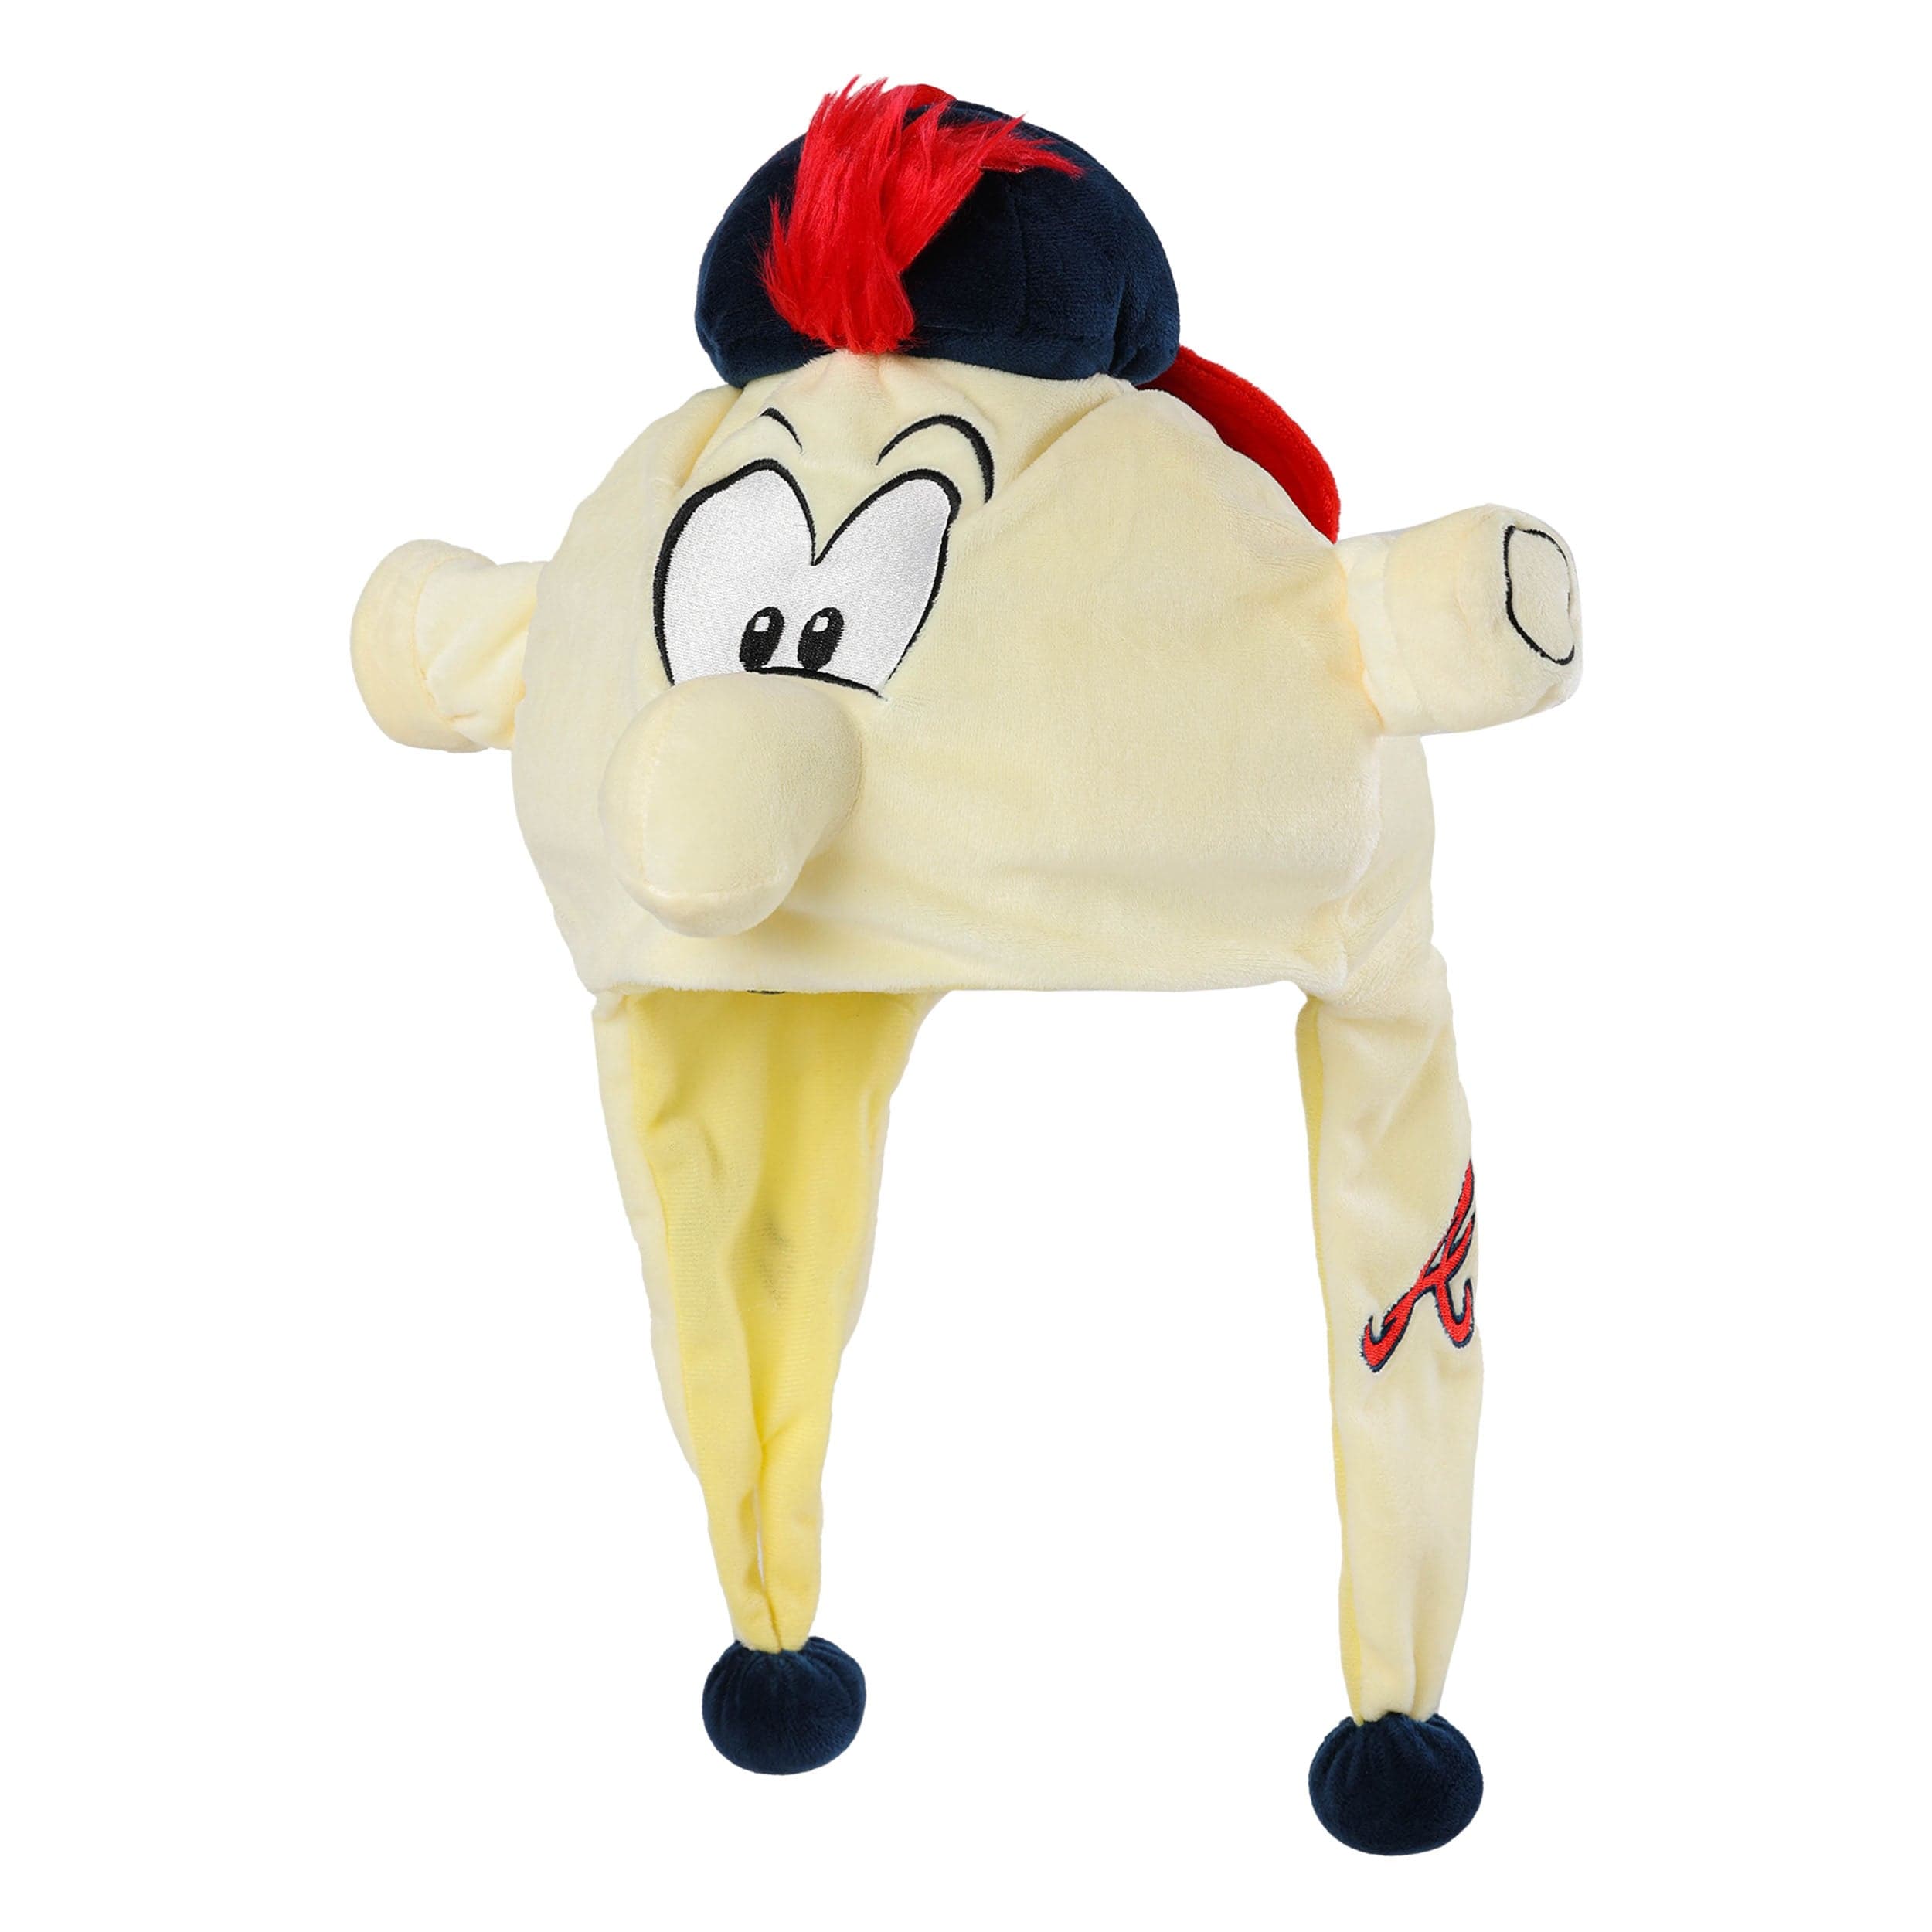 Blooper Braves  The Unofficial Website of the Official Mascot of the  Atlanta Braves